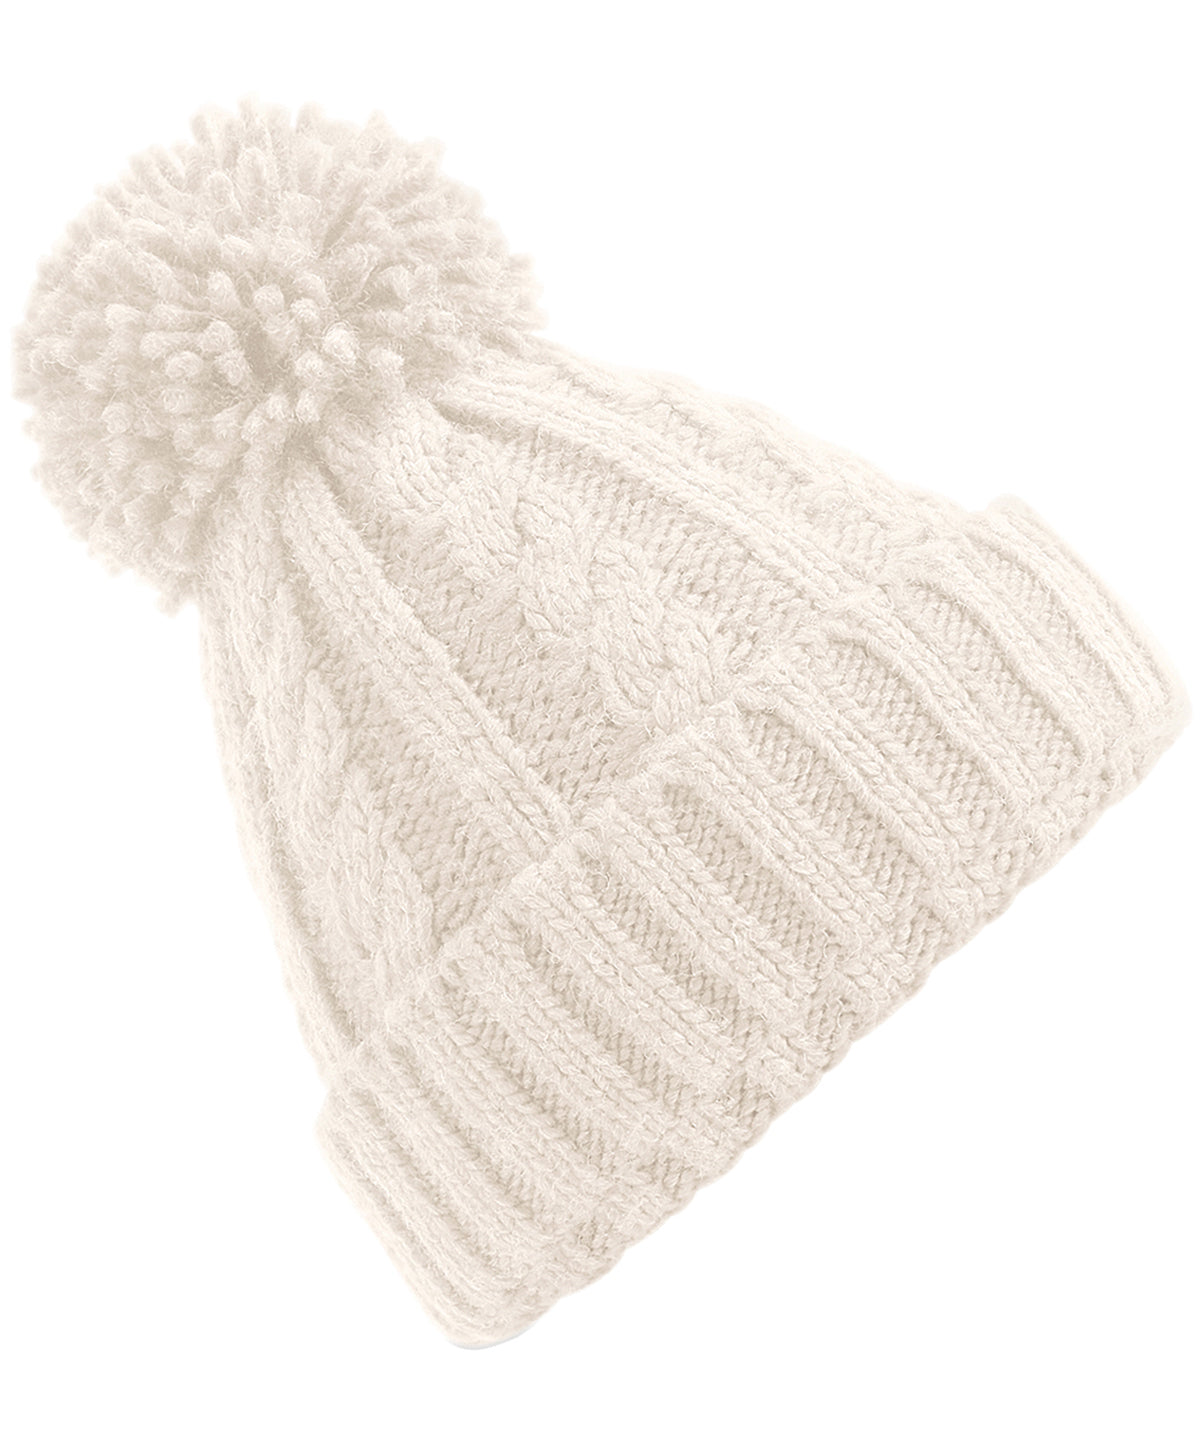 Personalised Hats - Off White Beechfield Cable knit melange beanie